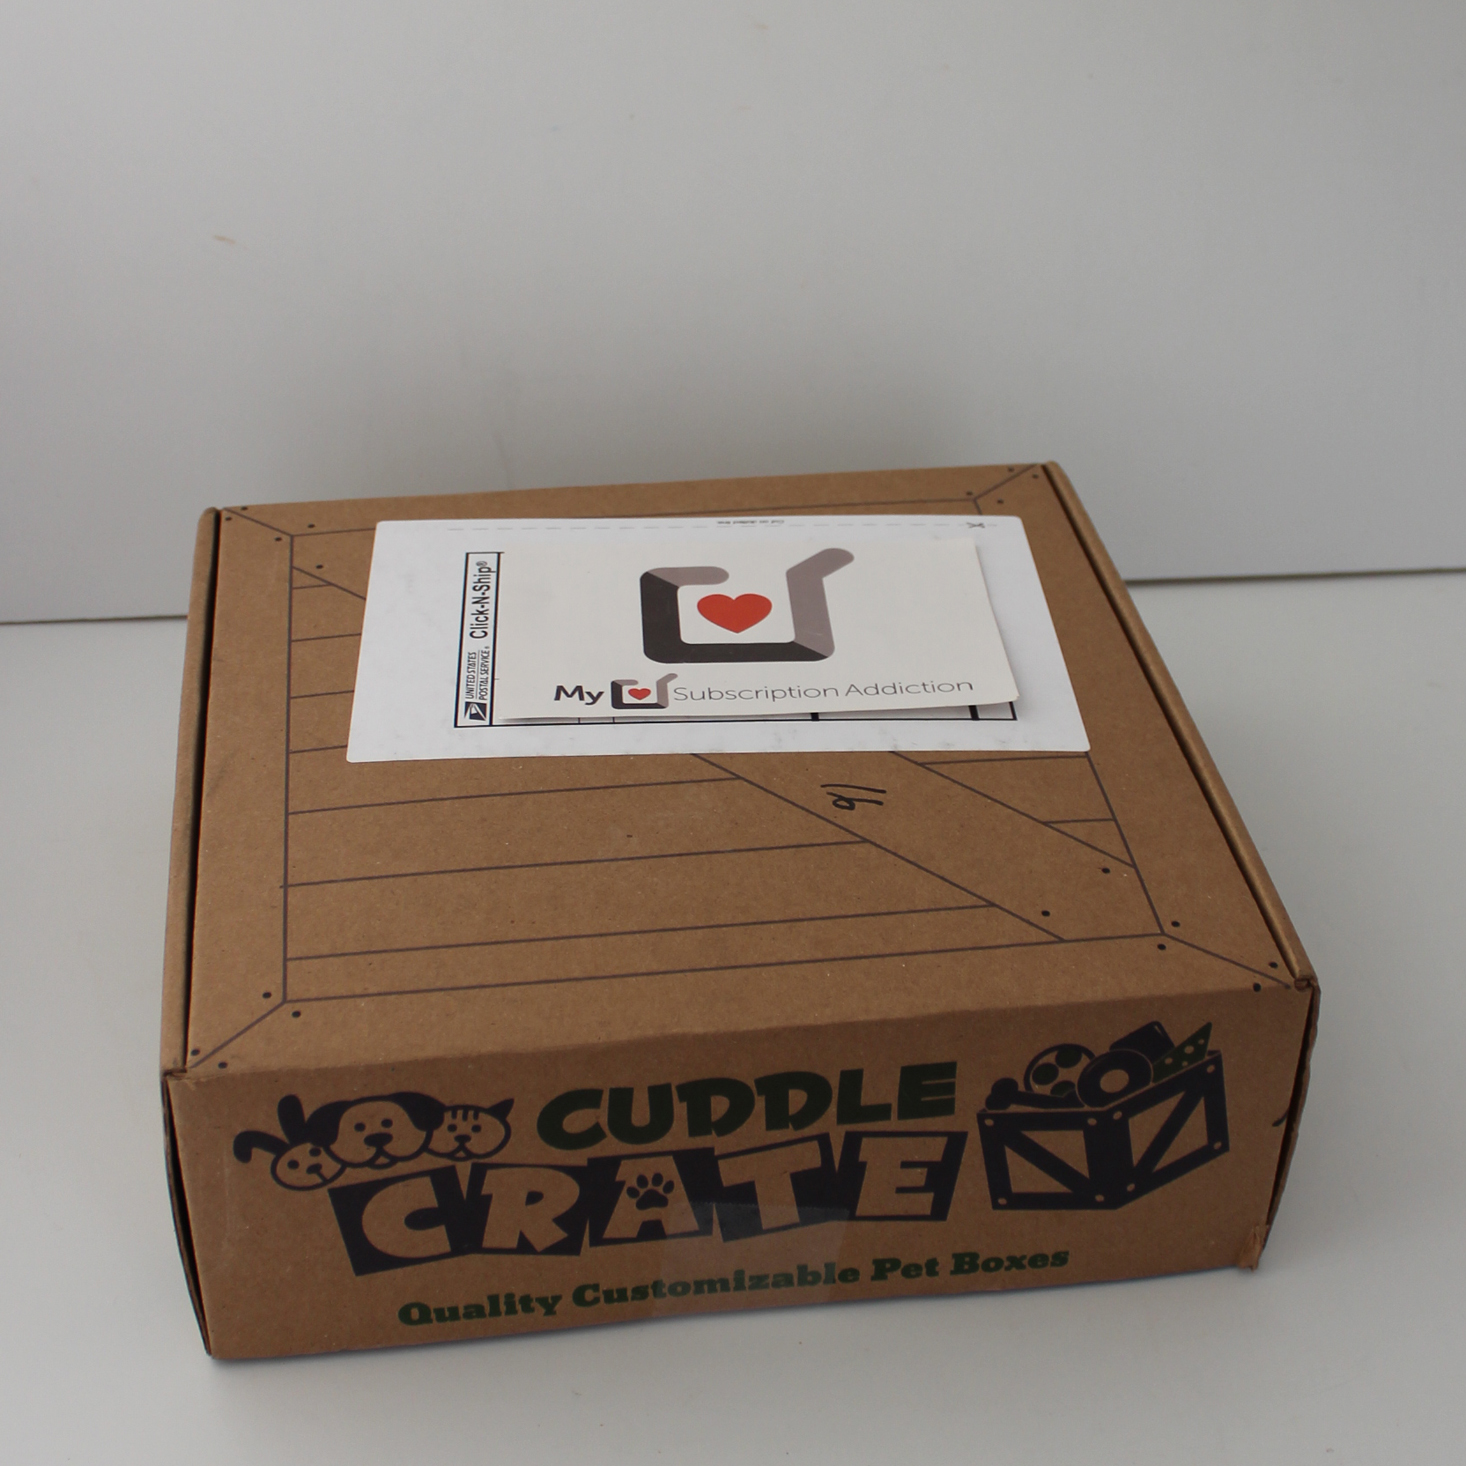 Cuddle Crate Box Review + Coupon – February 2019